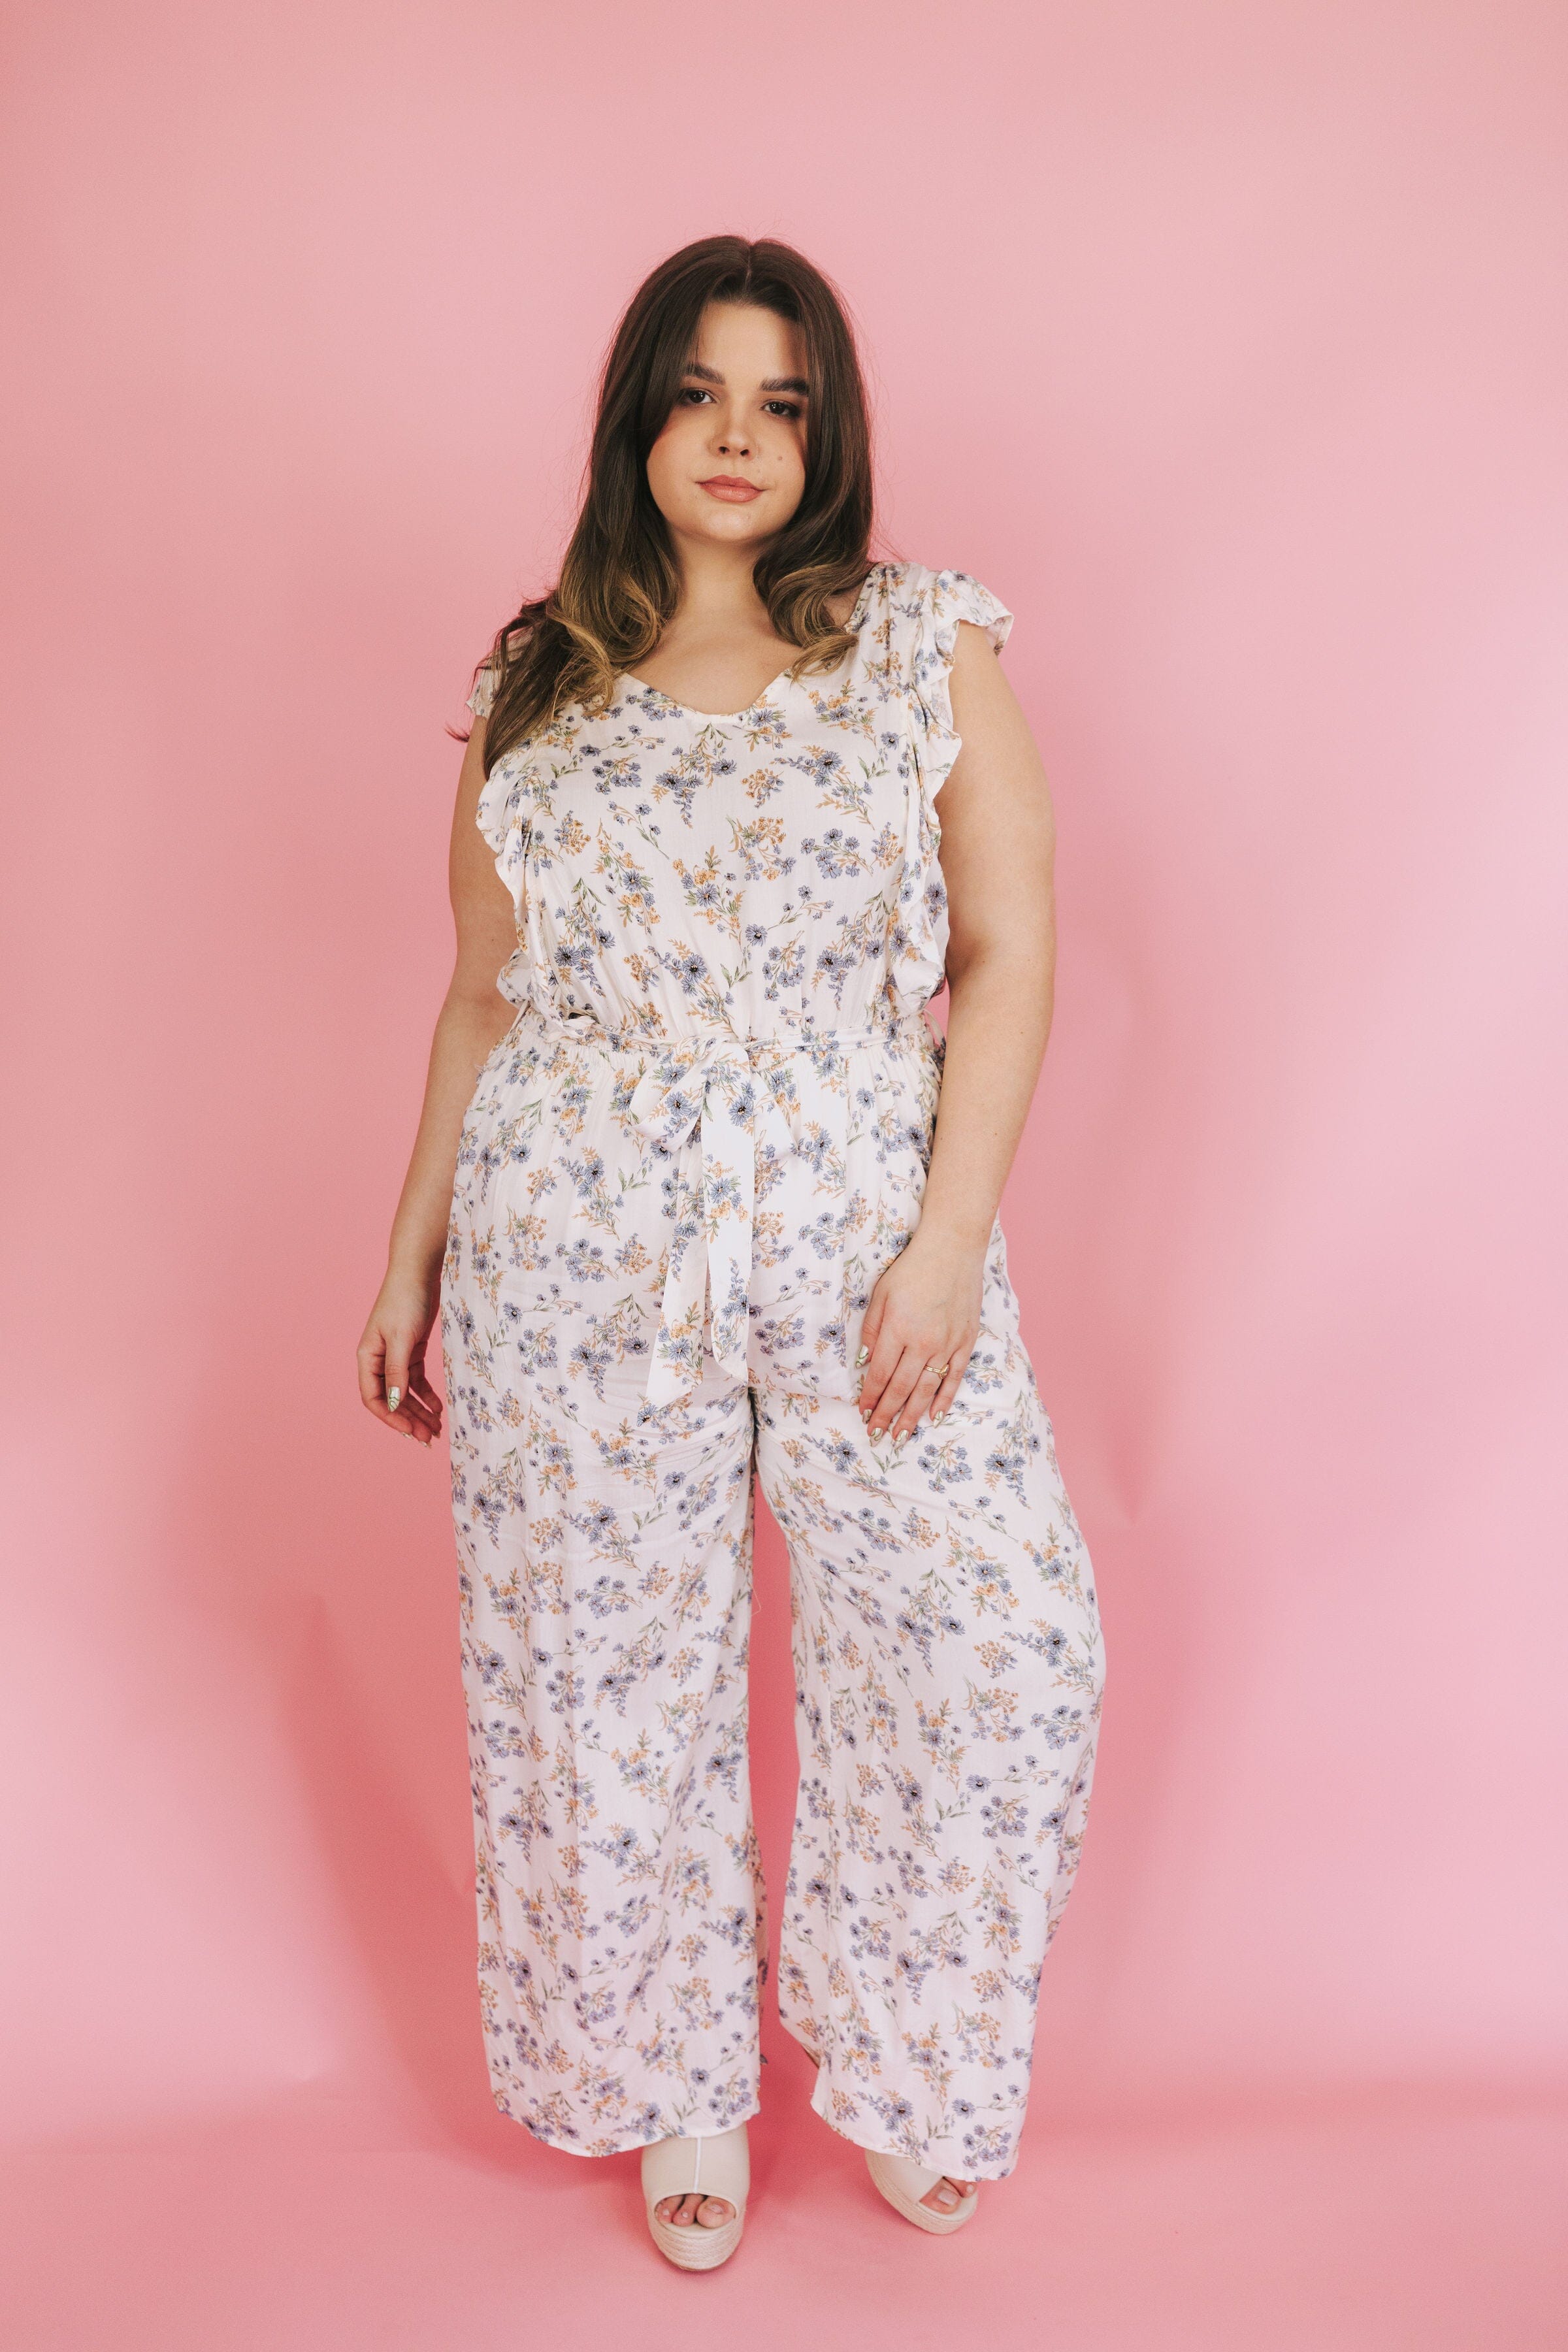 PLUS SIZE - She's With Me Jumpsuit